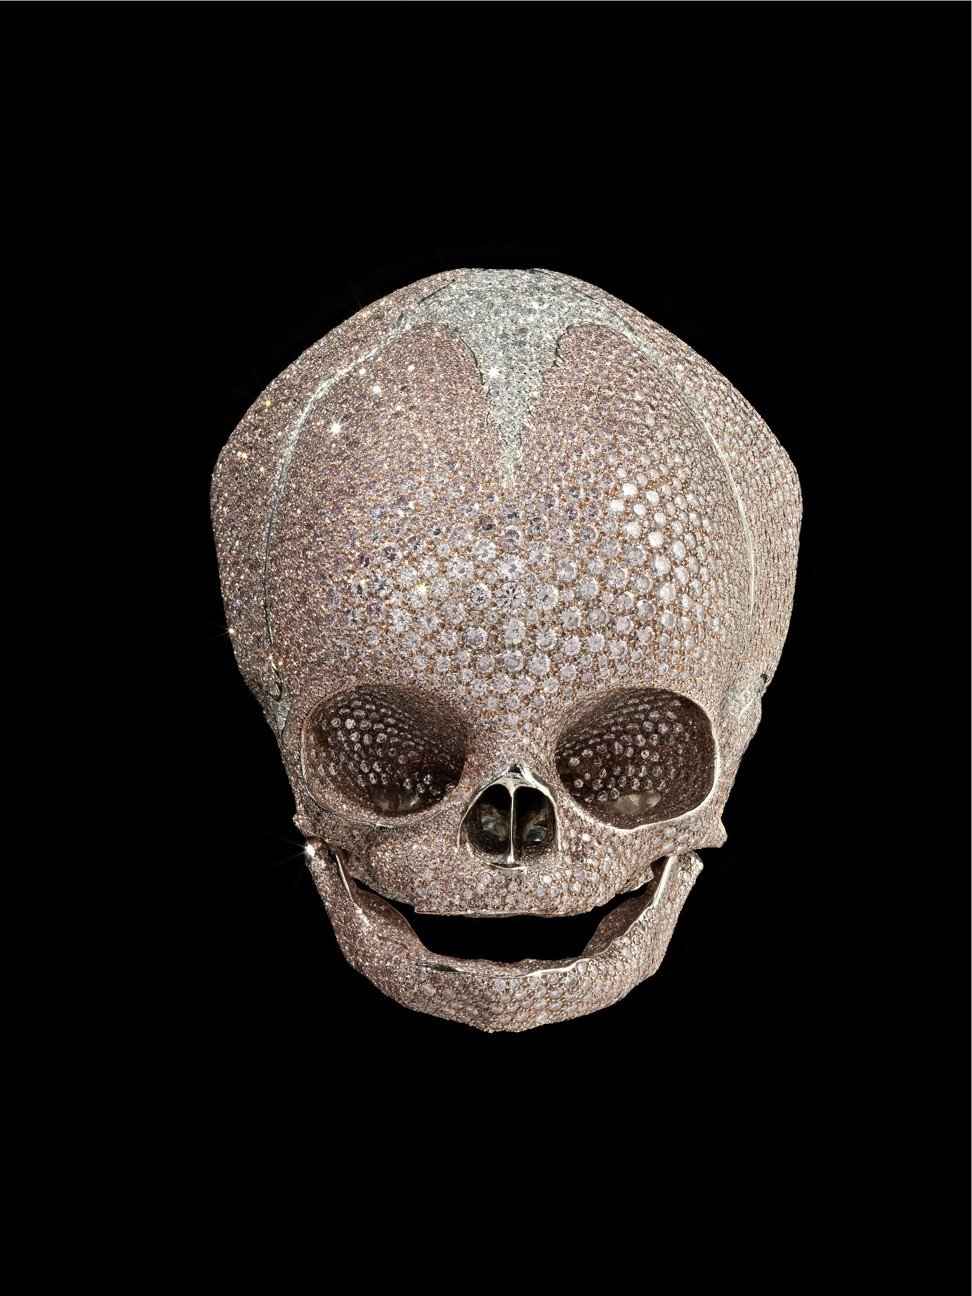 For Heaven’s Sake is an artwork by Damien Hirst that caused much debate. Photo: Gagosian Gallery.